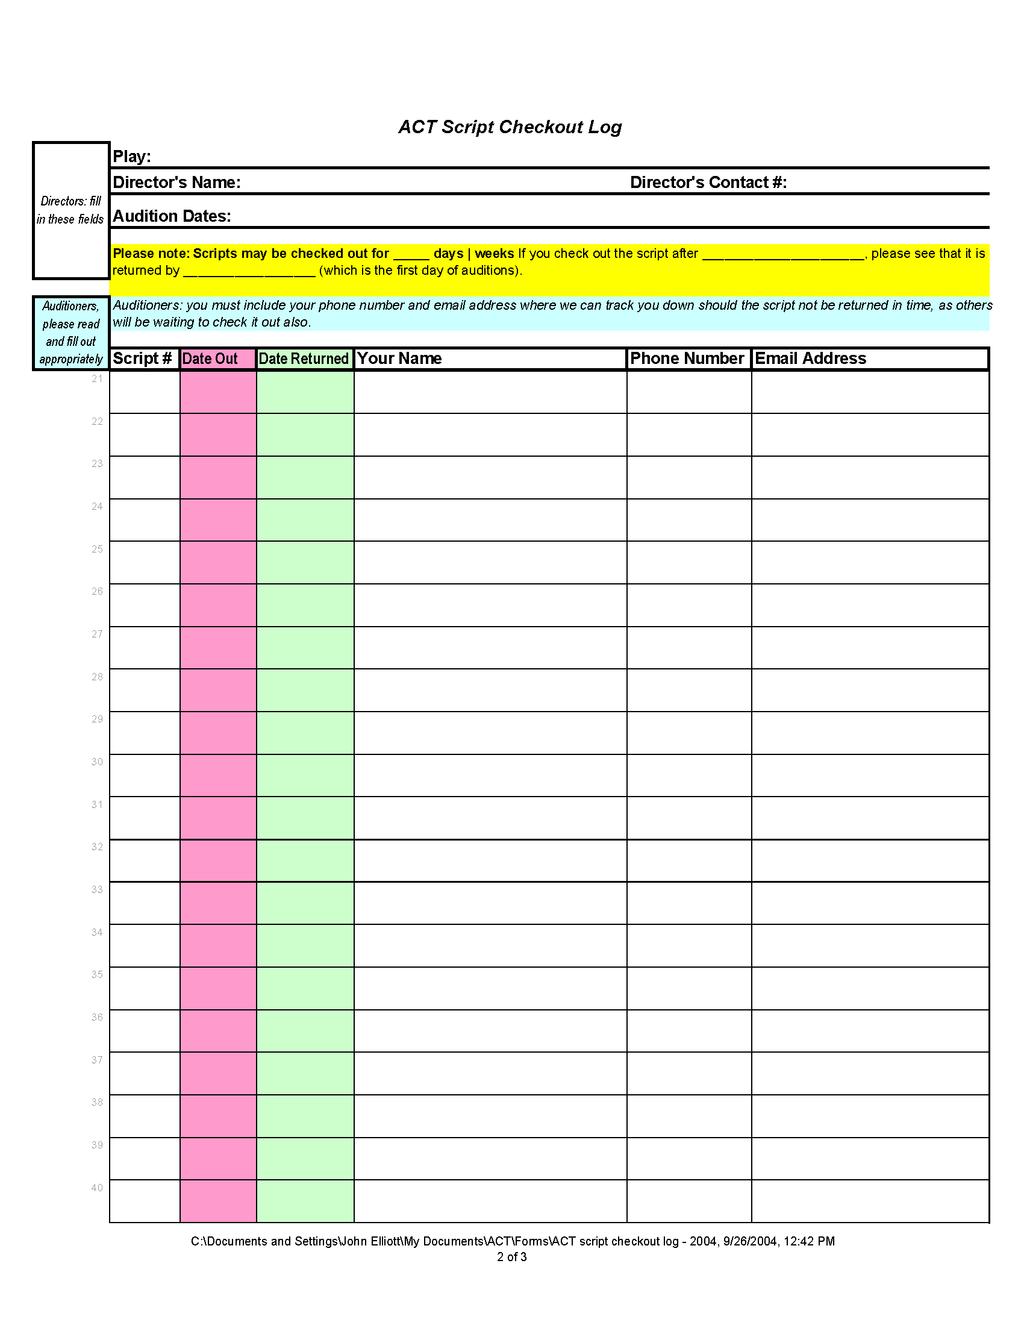 Script Checkout Log This form (next page) is